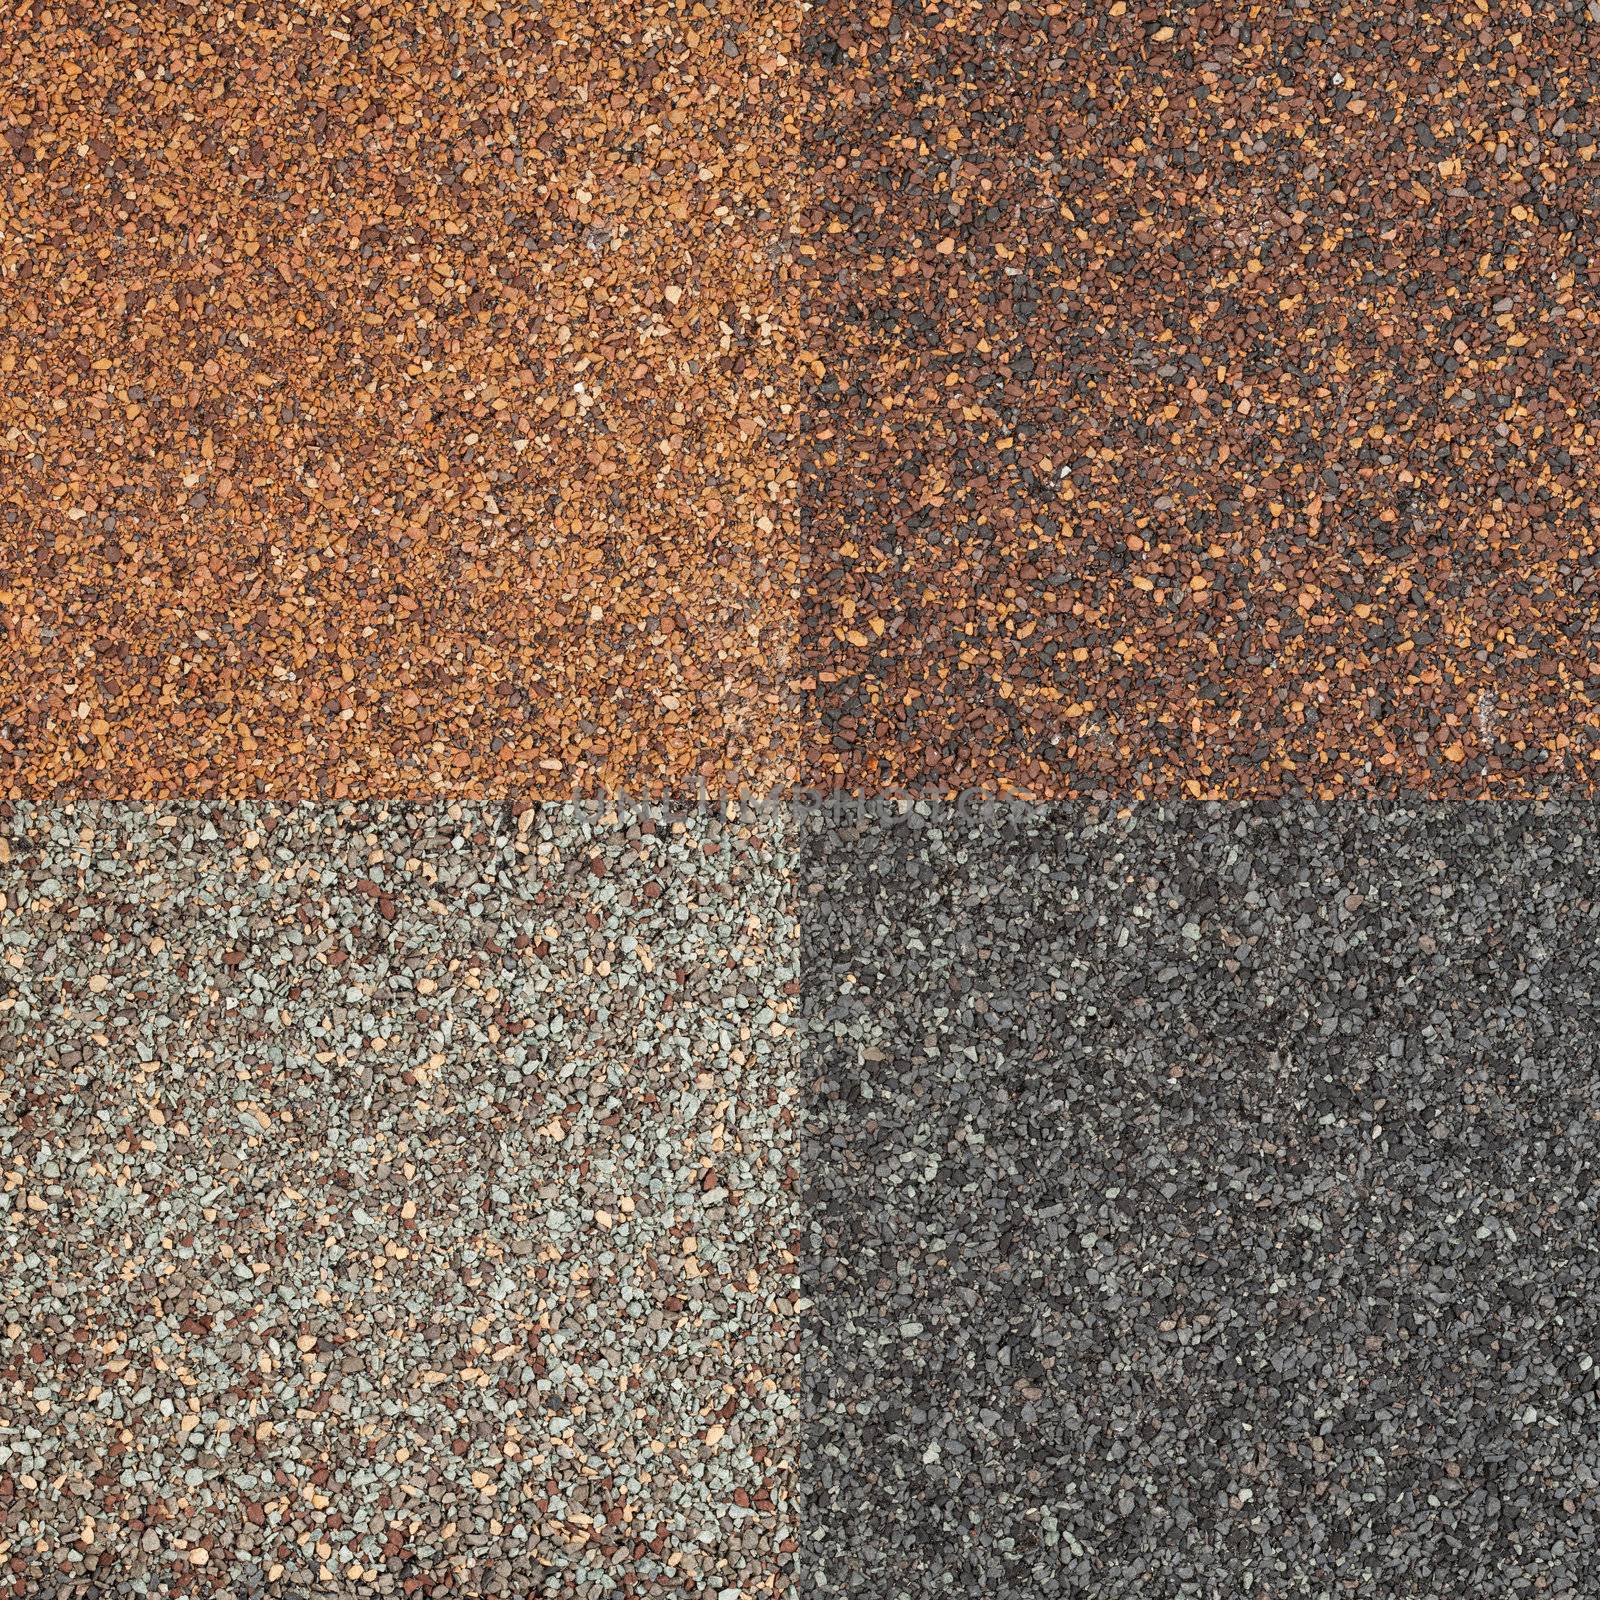 roof shingle texture by PixelsAway